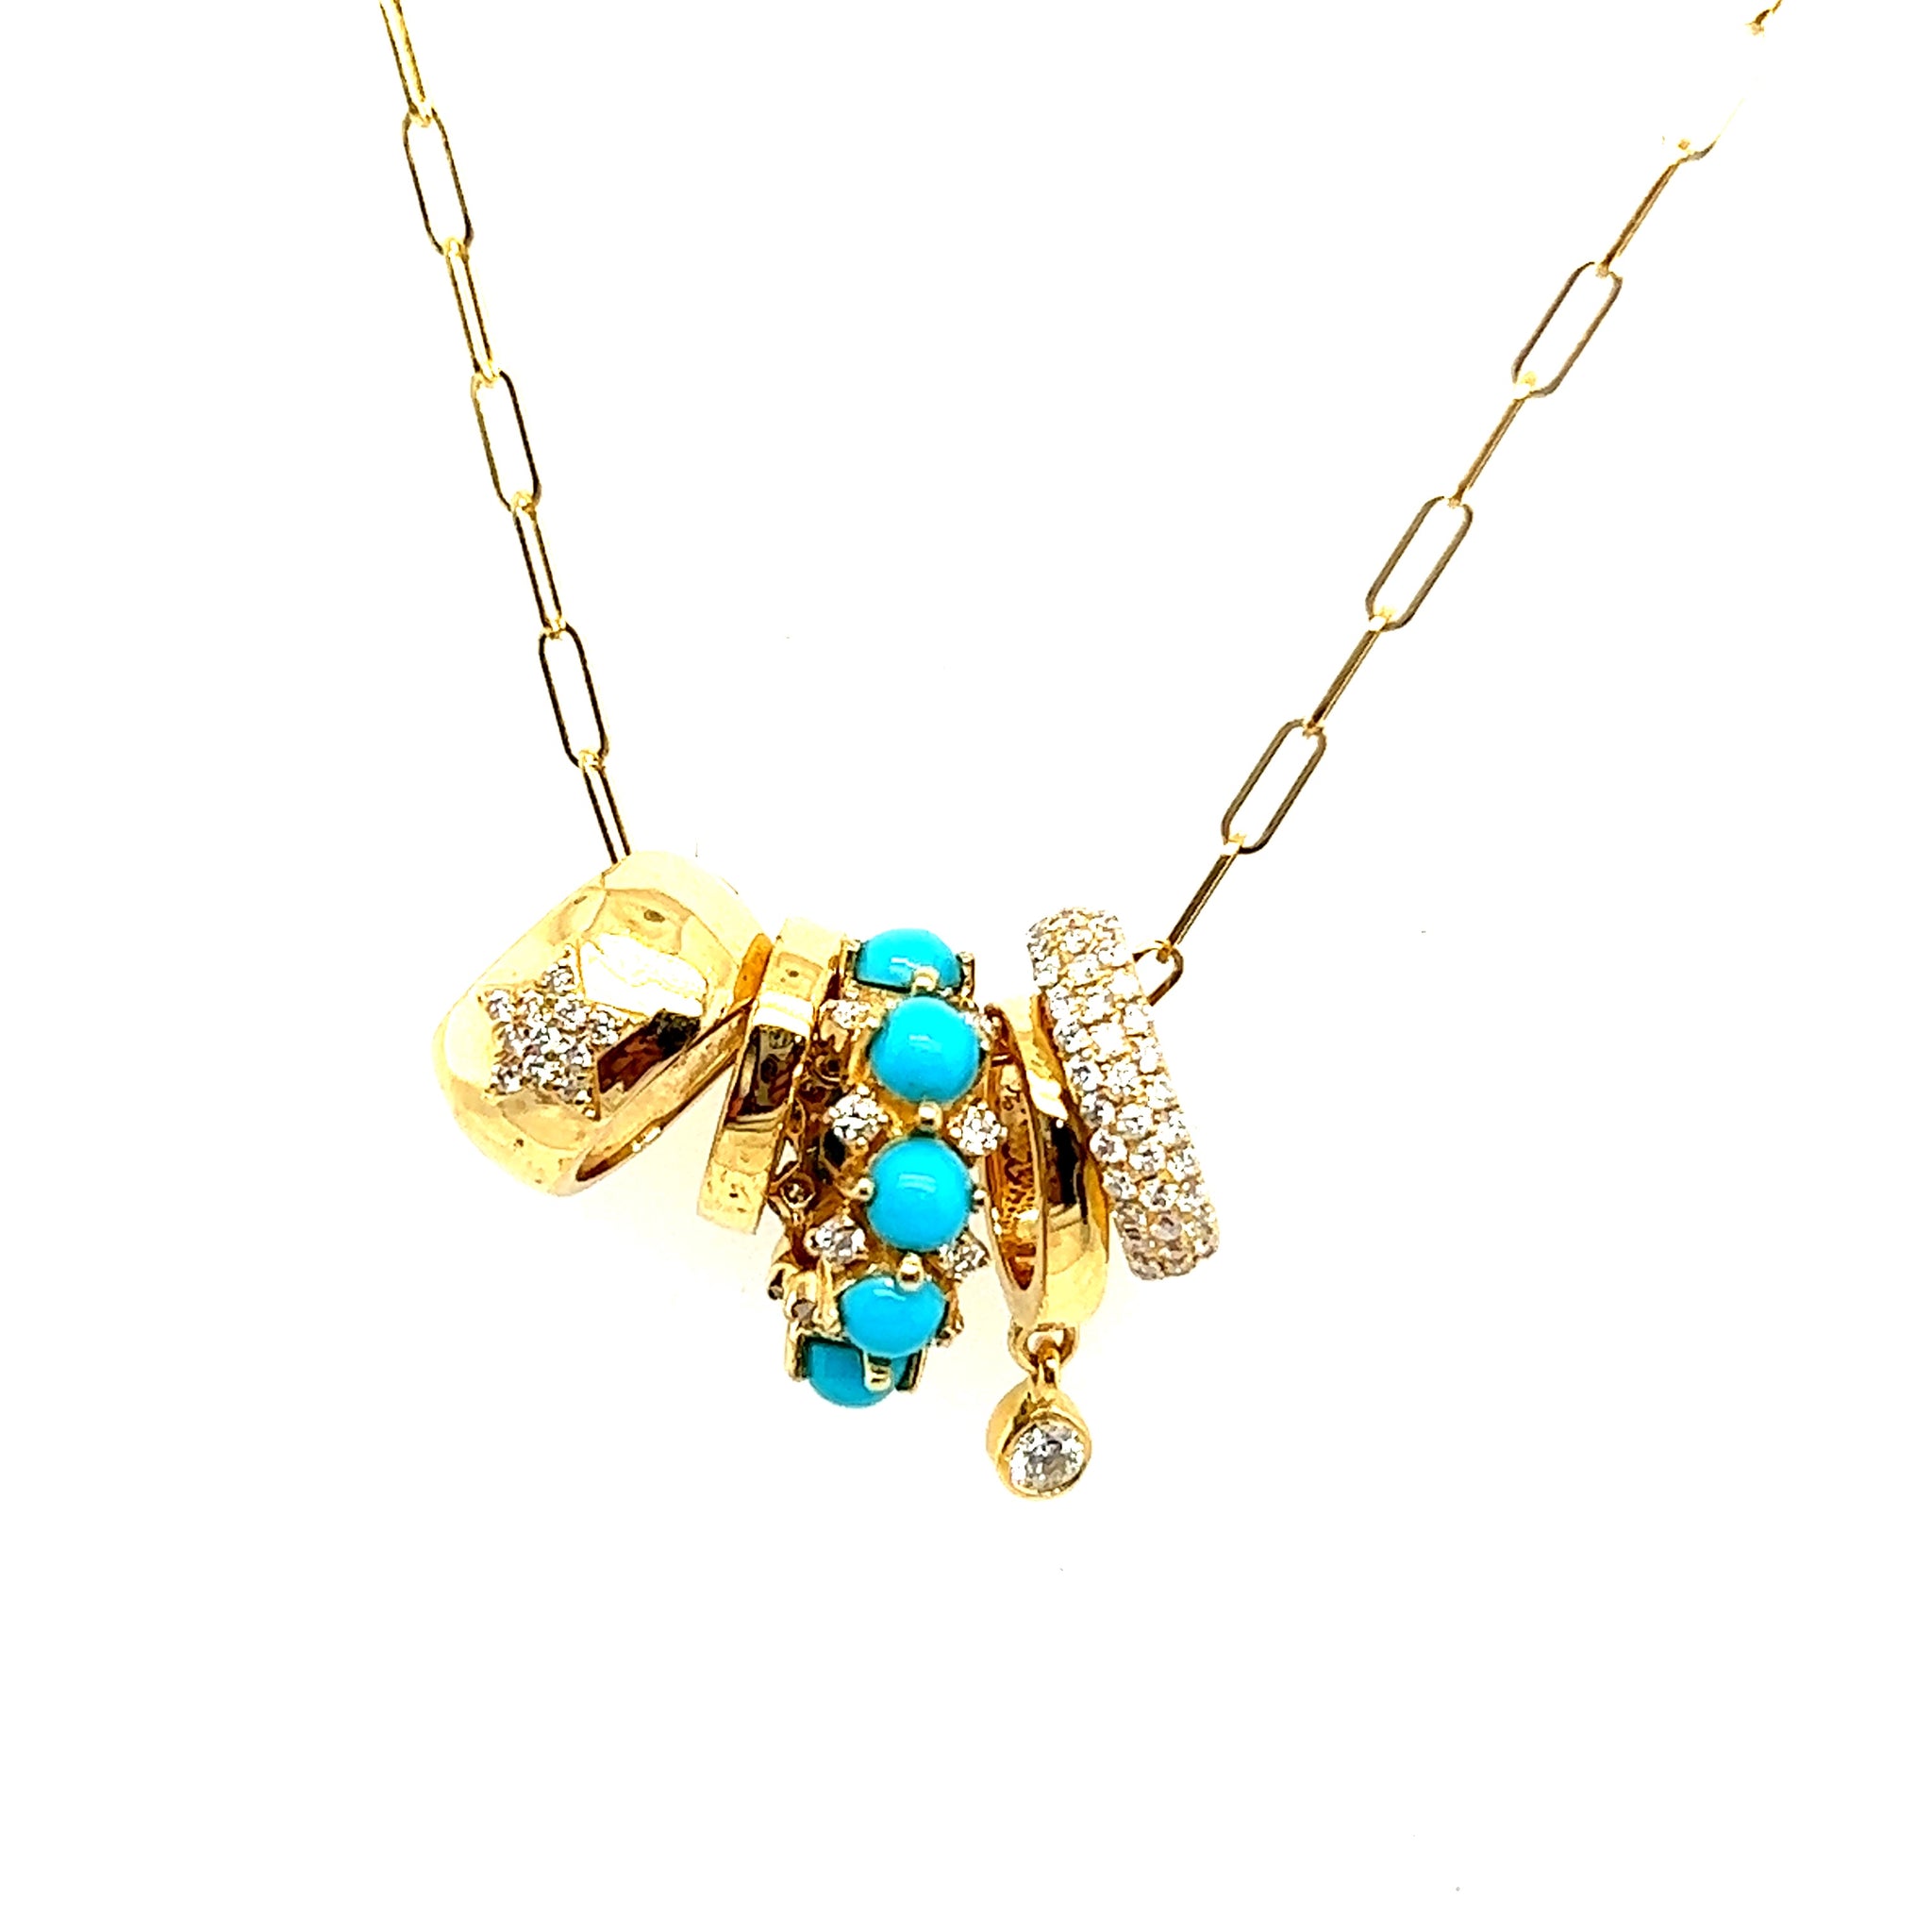 Multi Charm Necklace with Turquoise and Diamonds